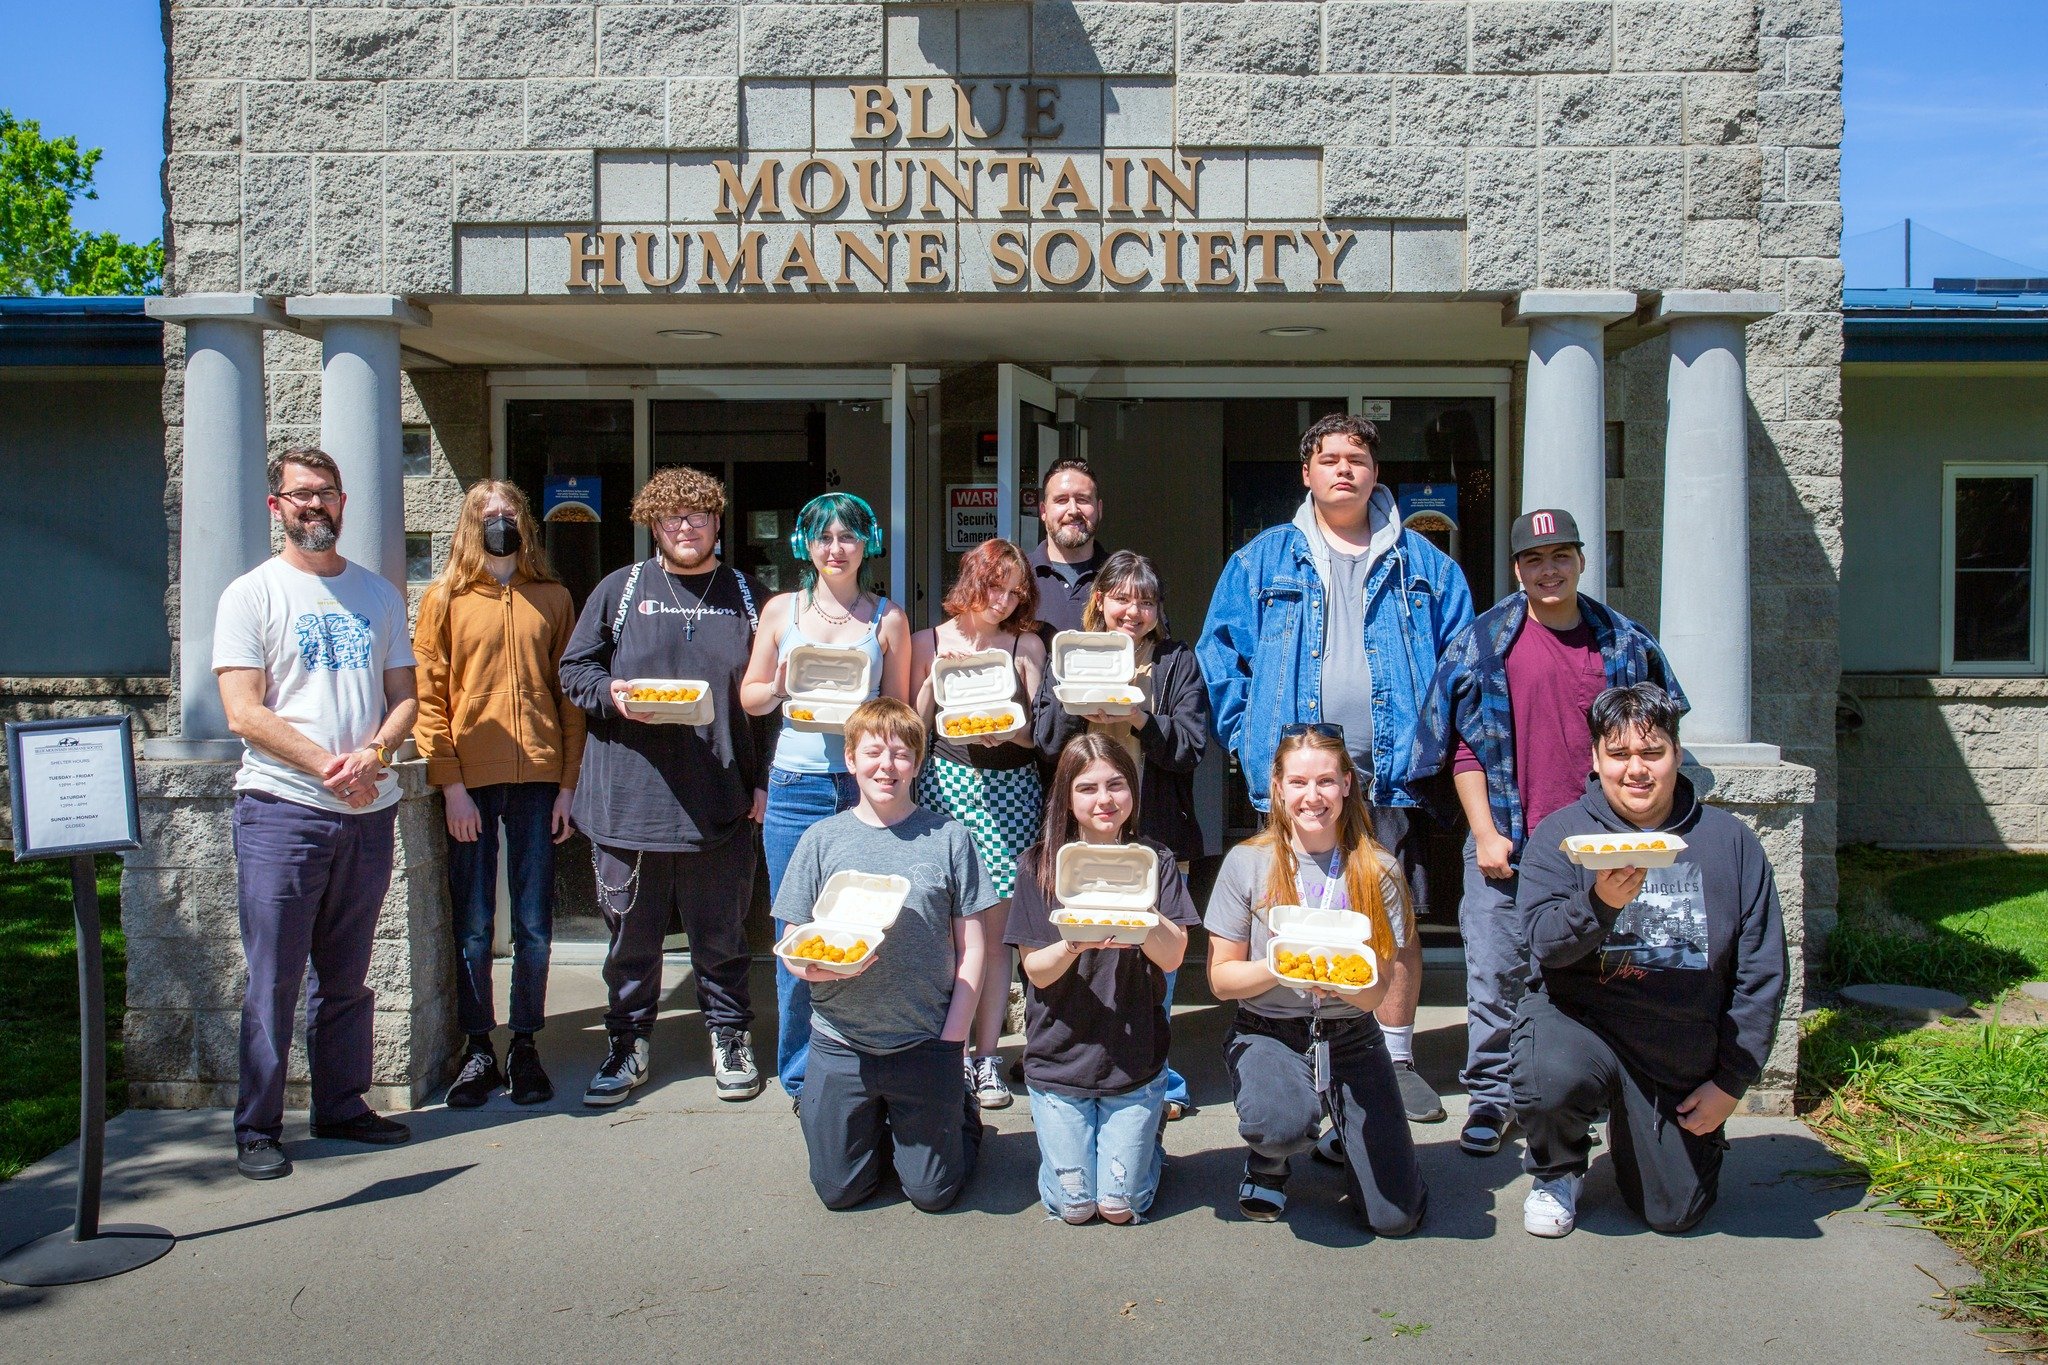 We're sending a heartfelt shoutout to the creative students and staff at Lincoln High School who surprised our pups with some homemade treats! Your kindness and thoughtfulness truly made our day at Blue Mountain Humane Society. 

Your donation is a b